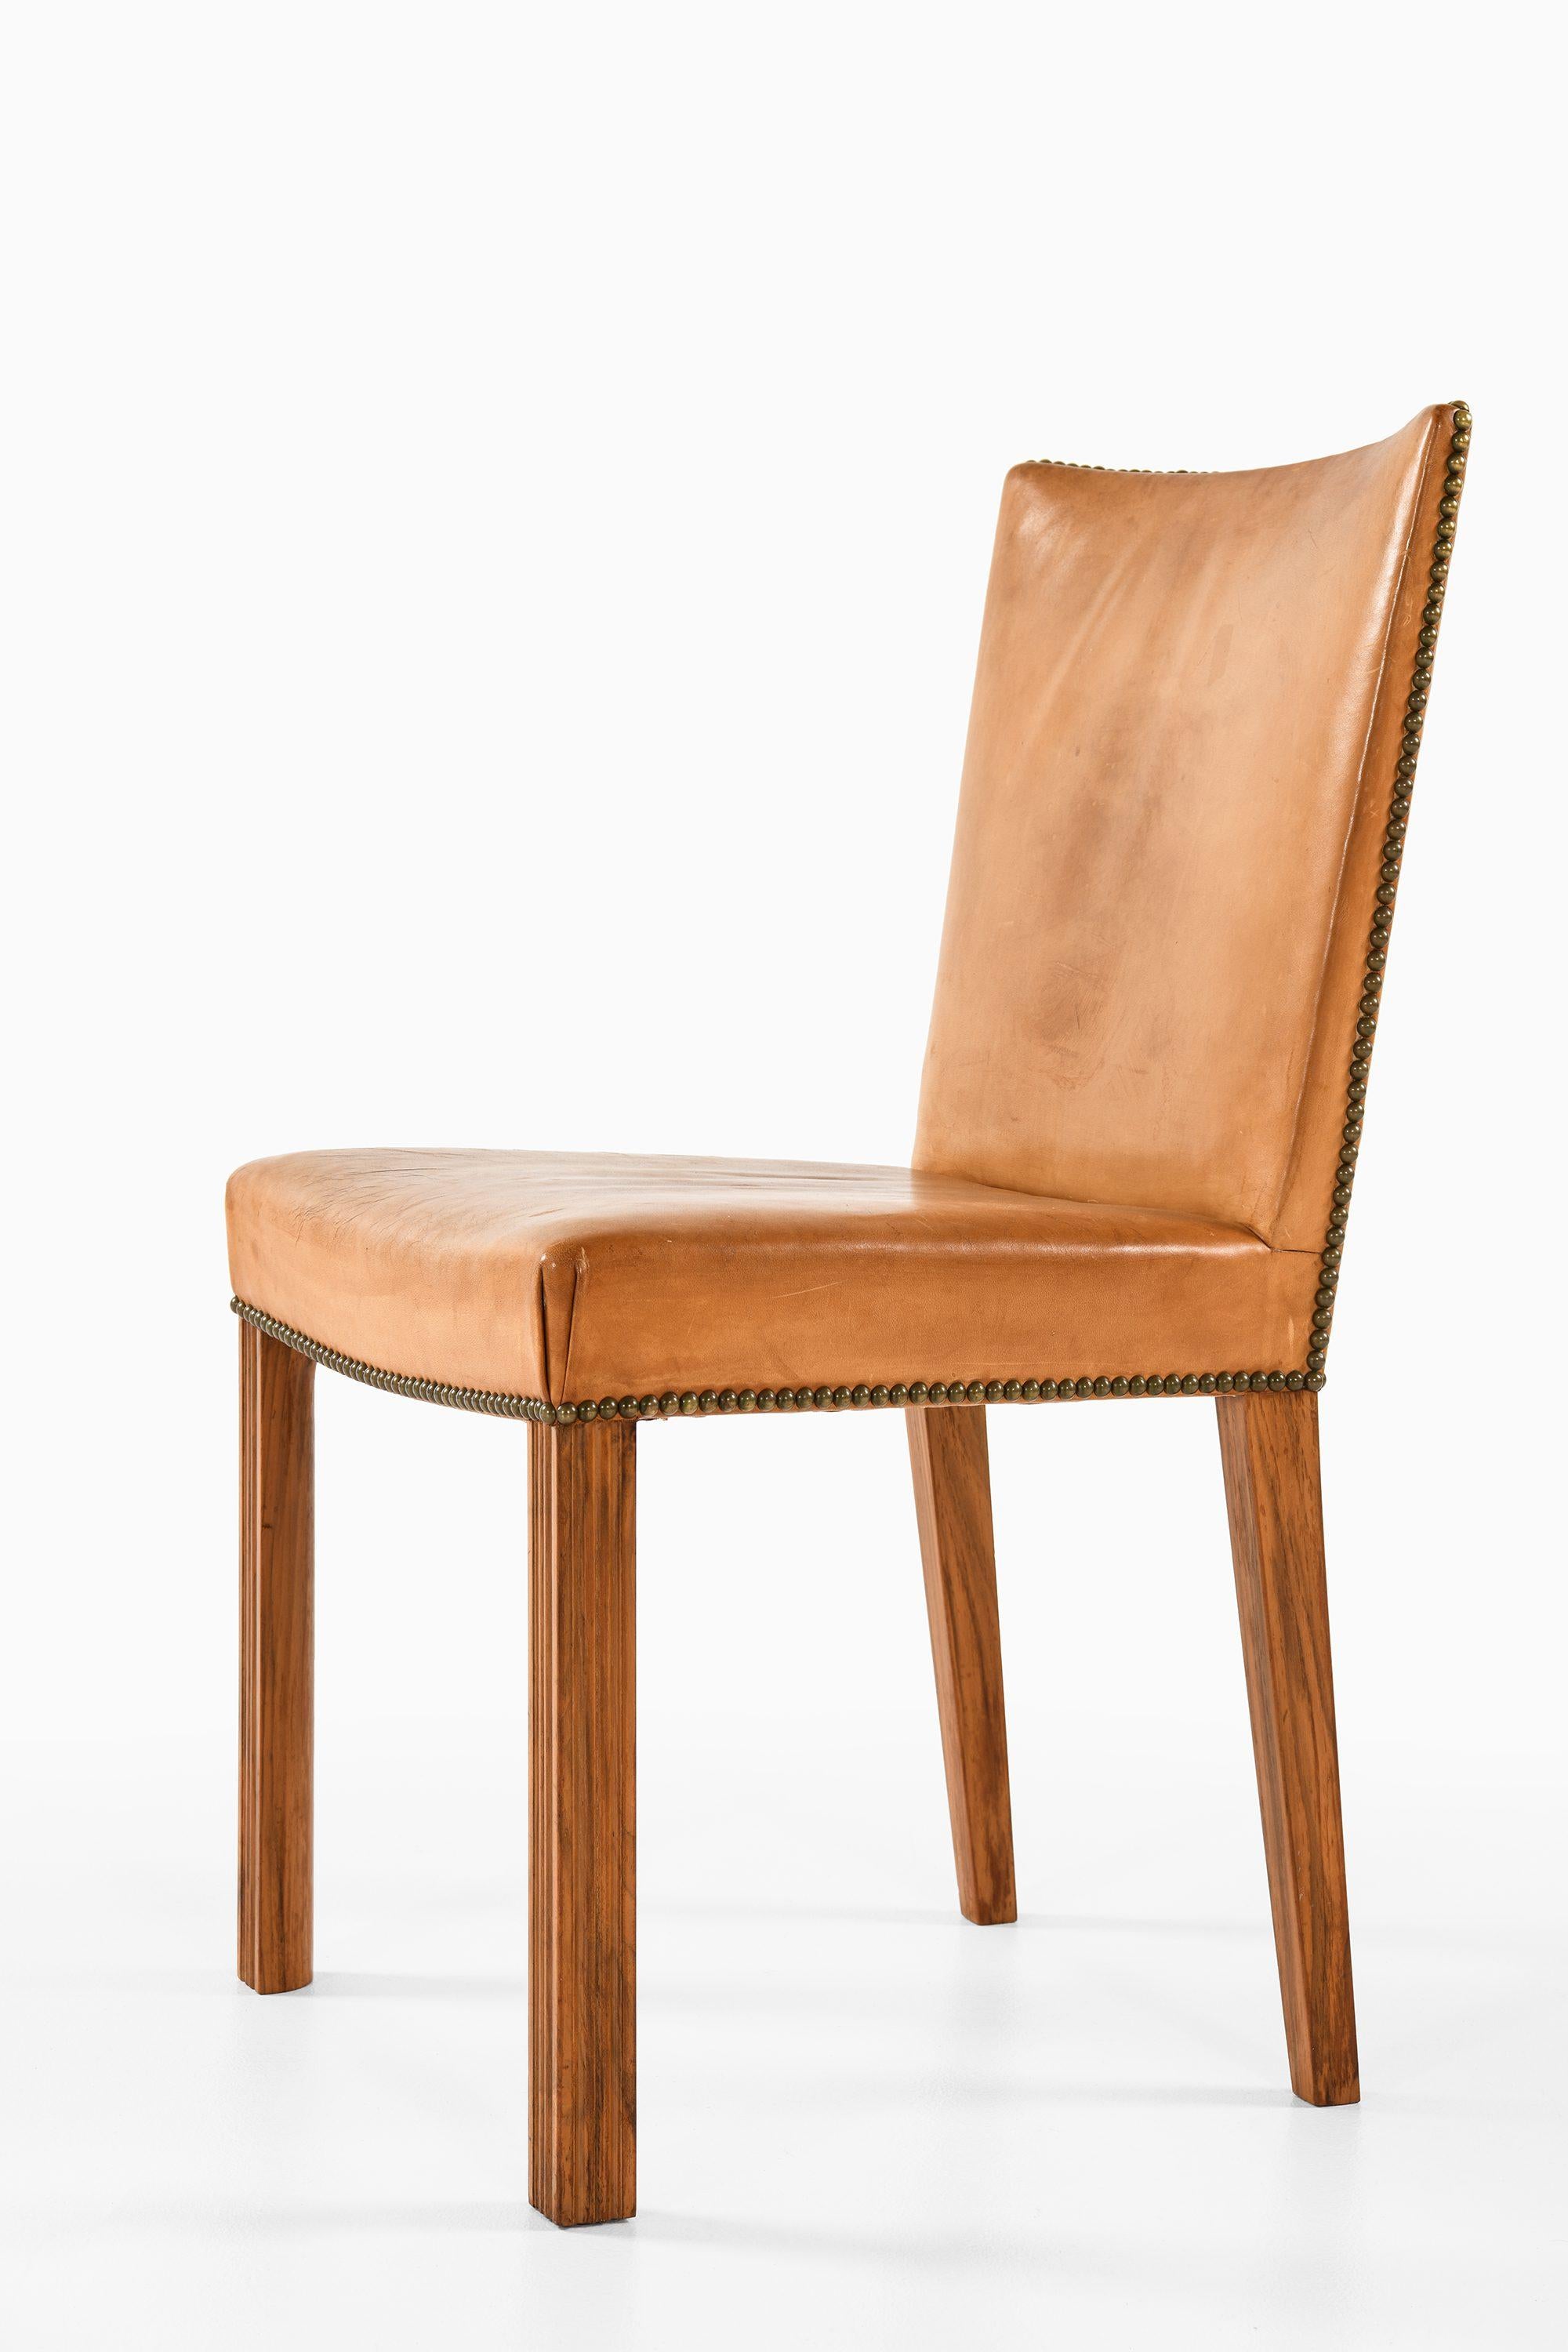 Set of 8 Dining Chairs in Walnut and Brass, 1940s

Additional Information:
Material: Walnut, original leather with brass rivets
Style: midcentury, Scandinavian
Produced in Sweden
Dimensions (W x D x H): 50 x 53 x 88 cm
Seat Height: 46